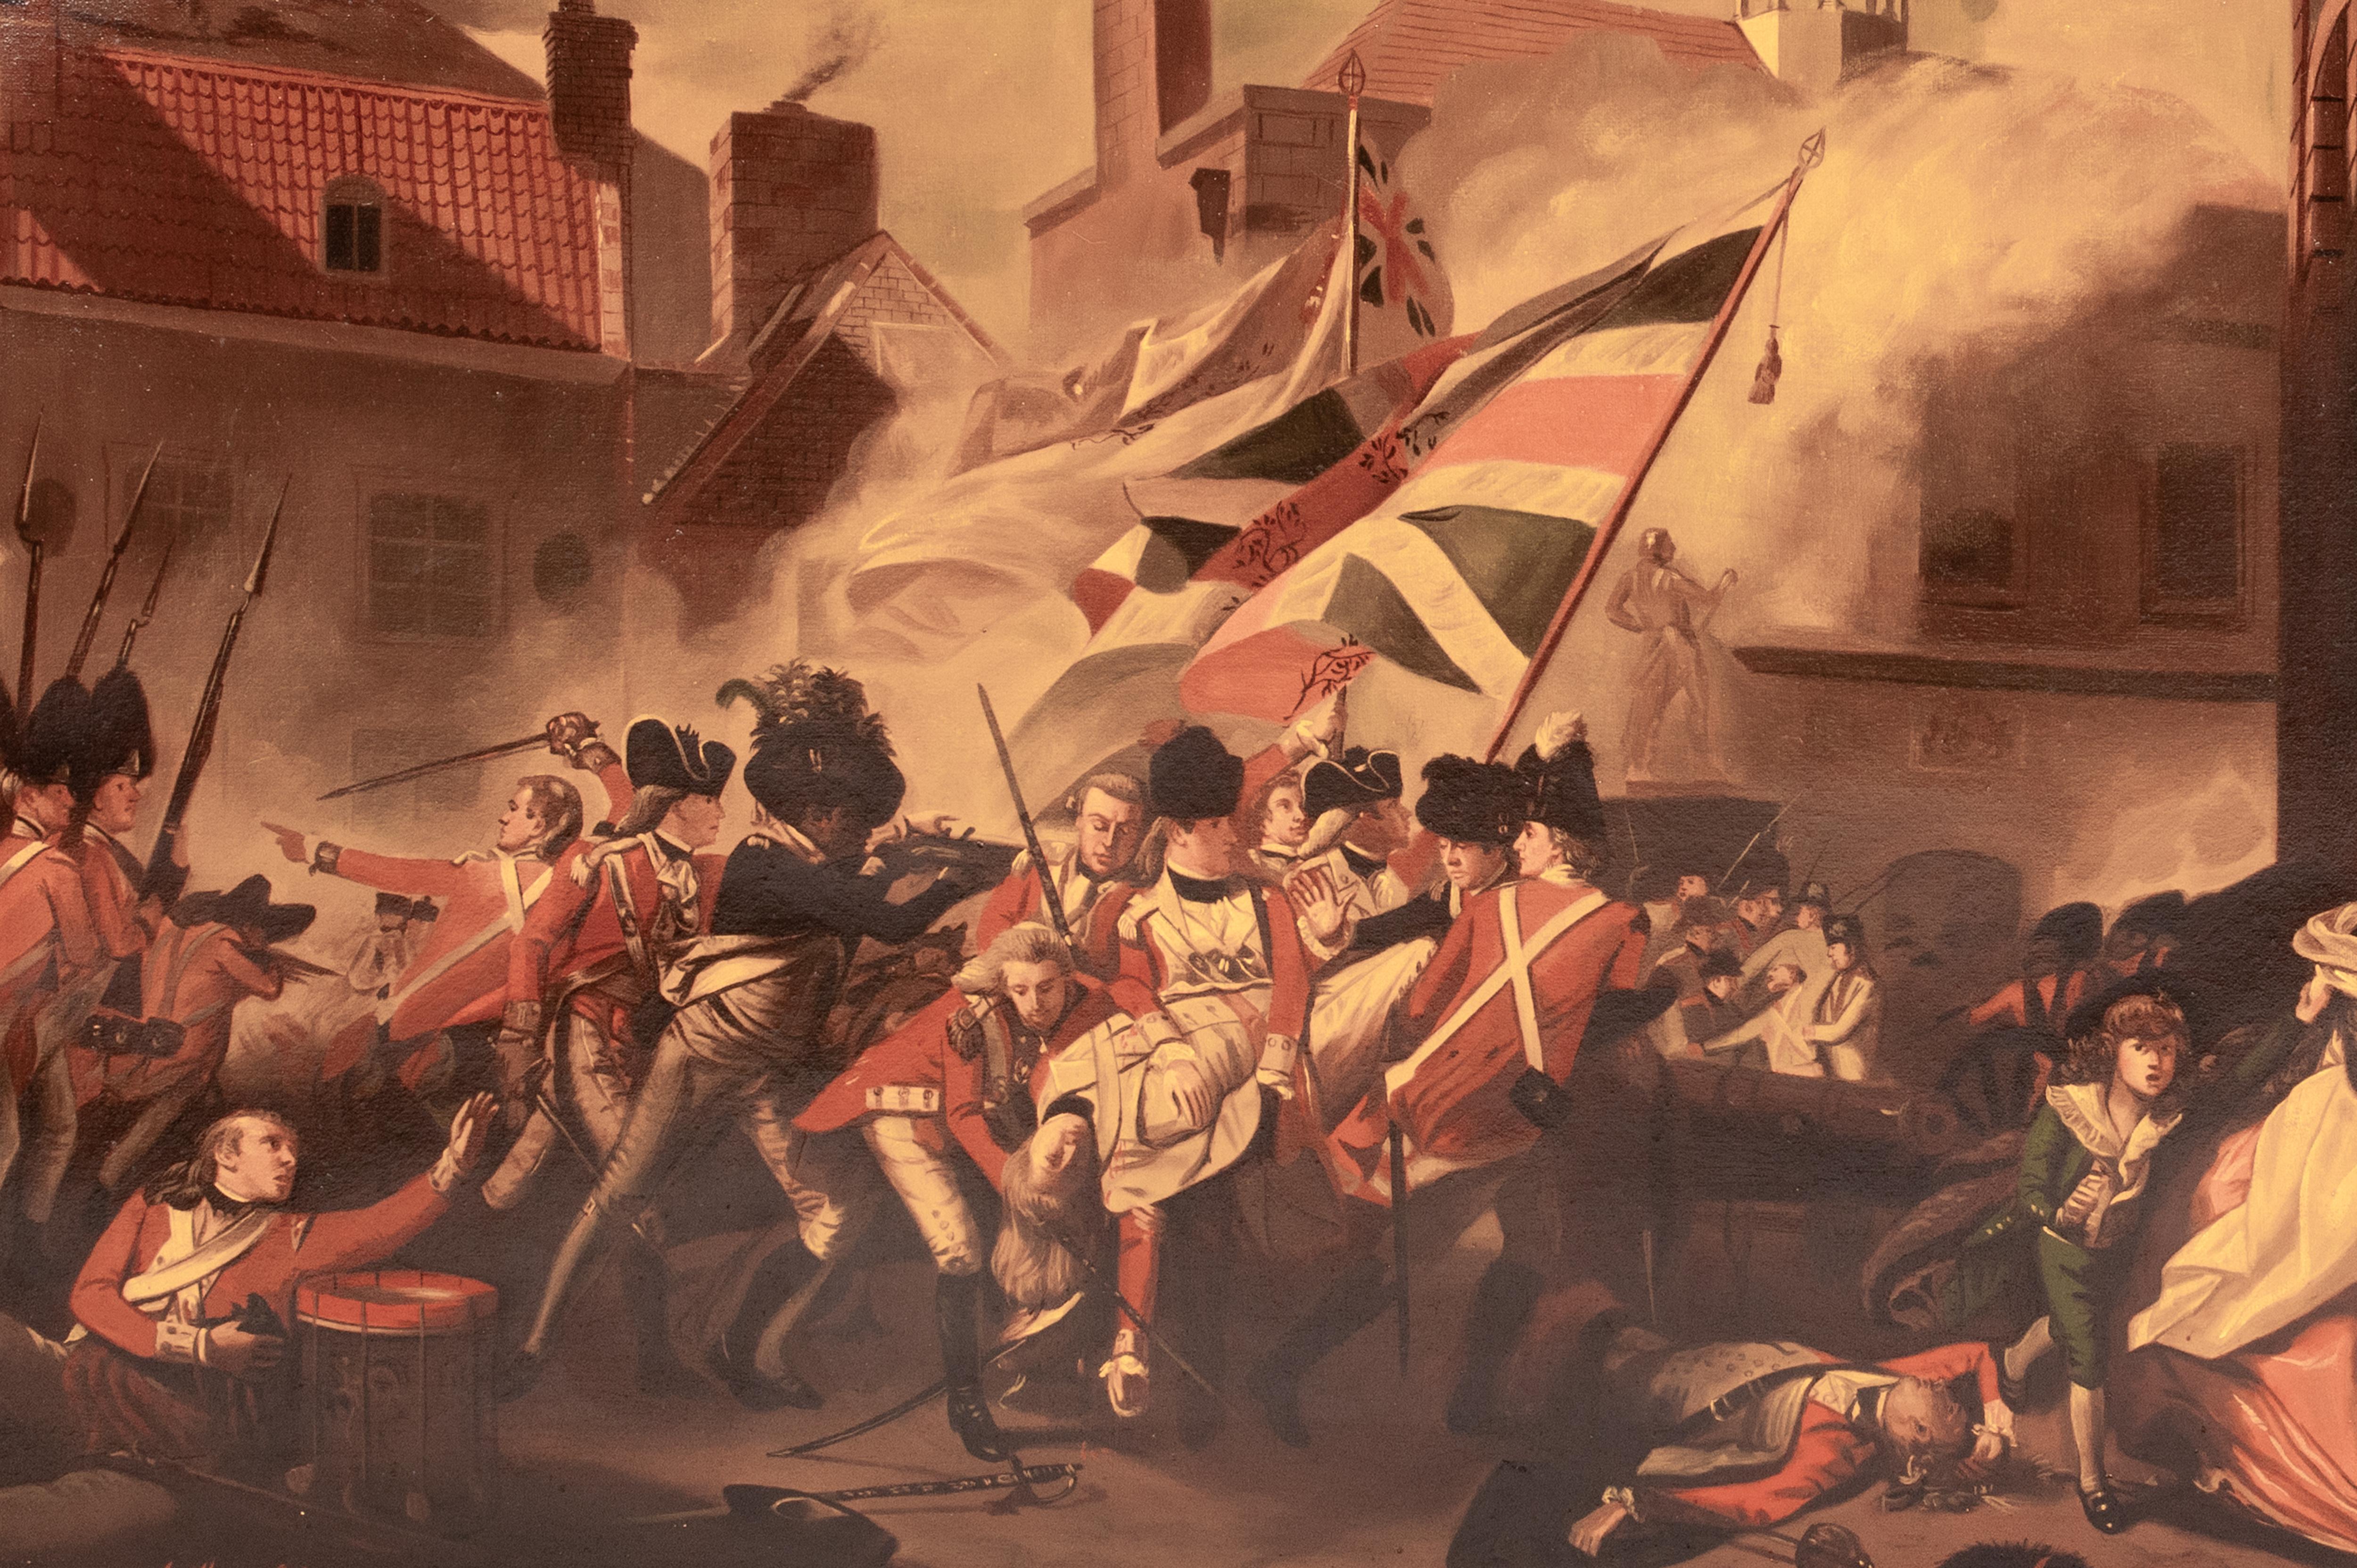 The Death Of Major Peirson, The Battle Of Jersey (1781), 19th Century

after John Singleton Copley RA (1738-1815)

Large 19th Century scene from The Battle Of Jersey, 1781, between the French at British at St Helier as Major Peirson body is carried